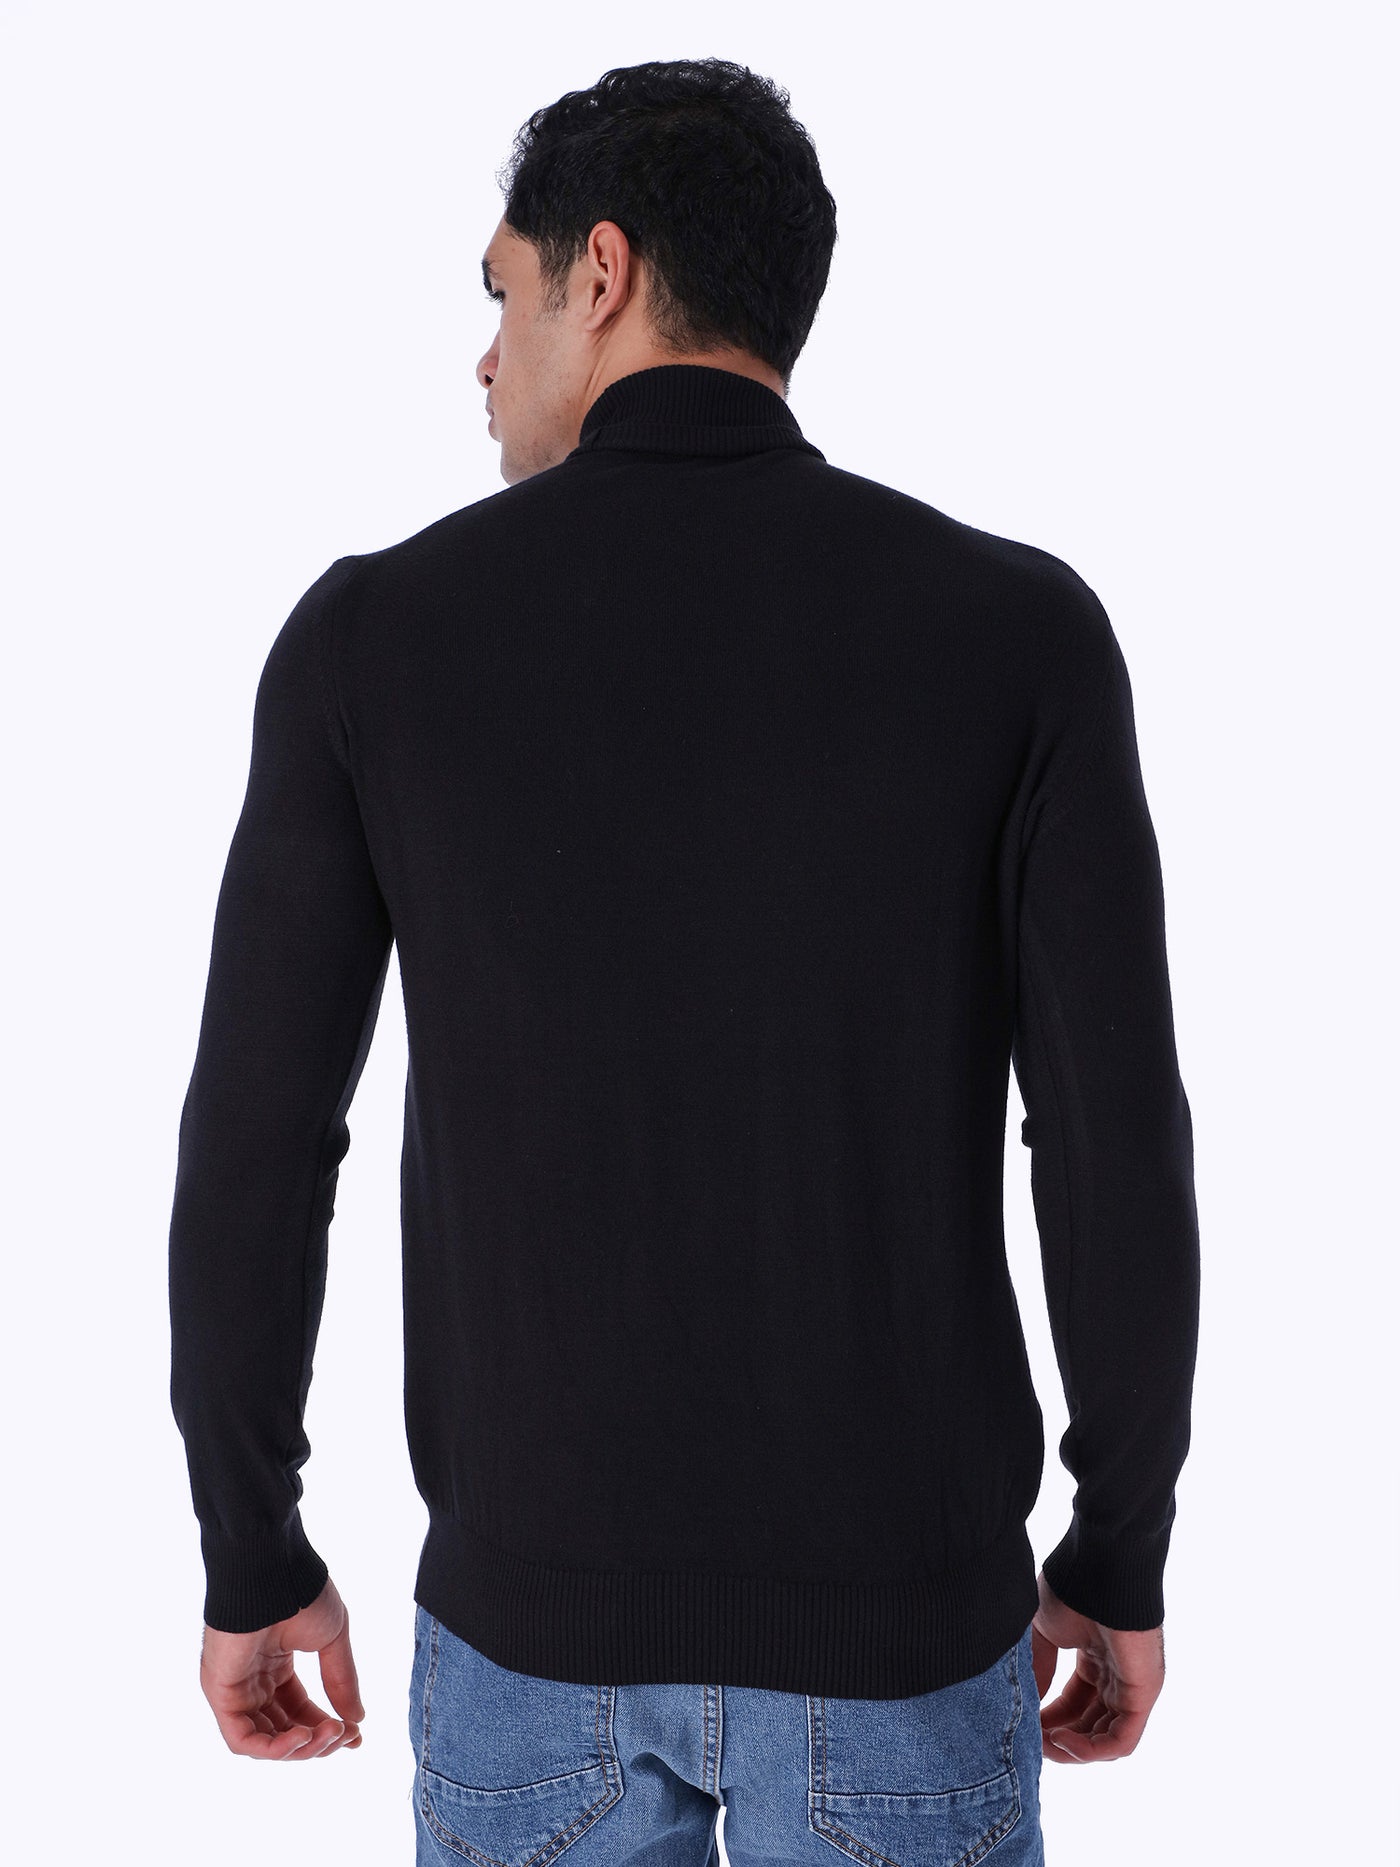 OR Mens Turtle Neck Sweater